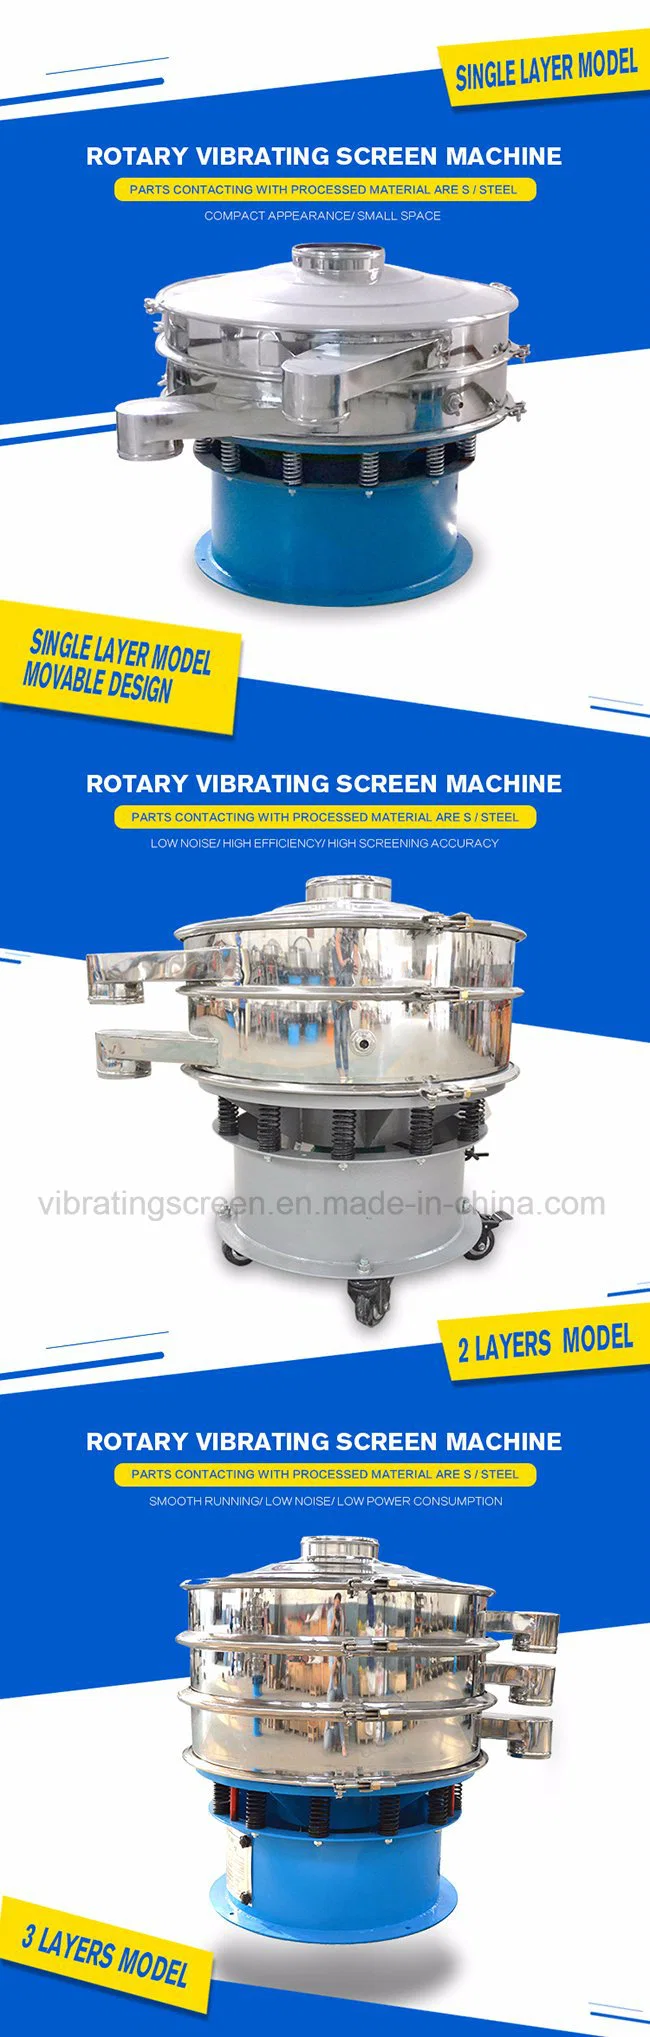 Three Dimensions Stainless Steel Vibrating Screen for Pork Floss